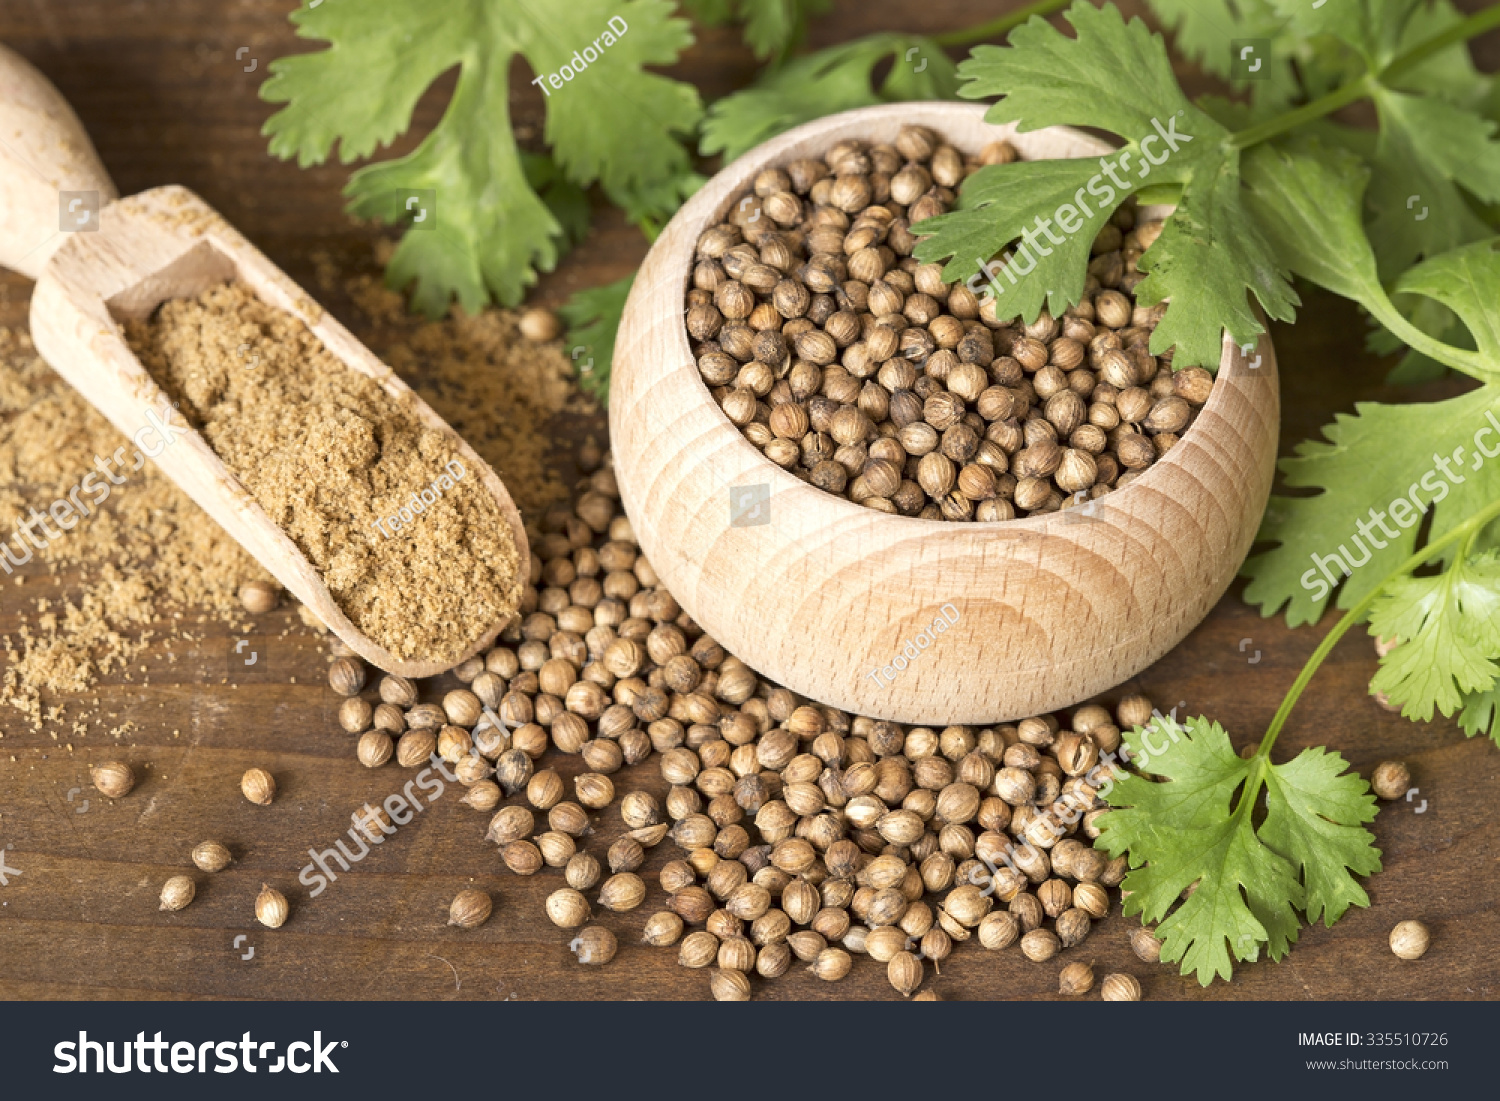 Coriander seeds and leaves on a wooden background #335510726